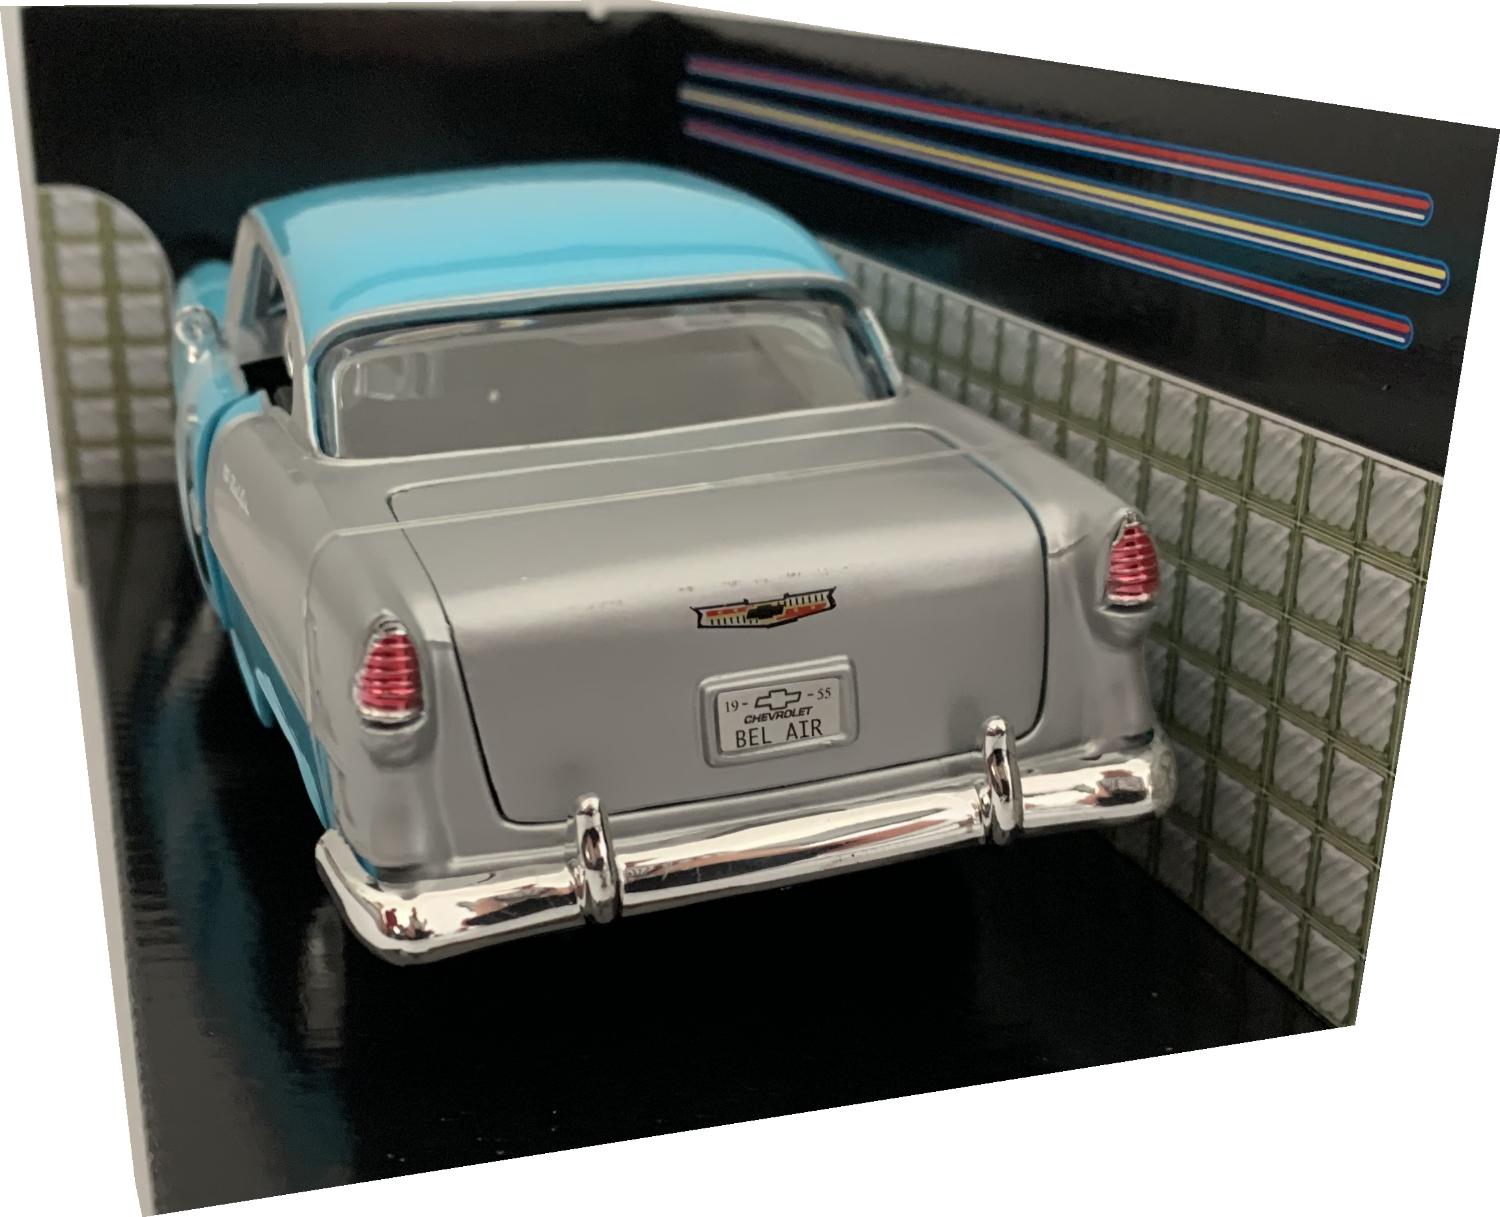 Chevrolet Bel Air Hard Top 1955 in blue and silver 1:24 scale model from Motormax